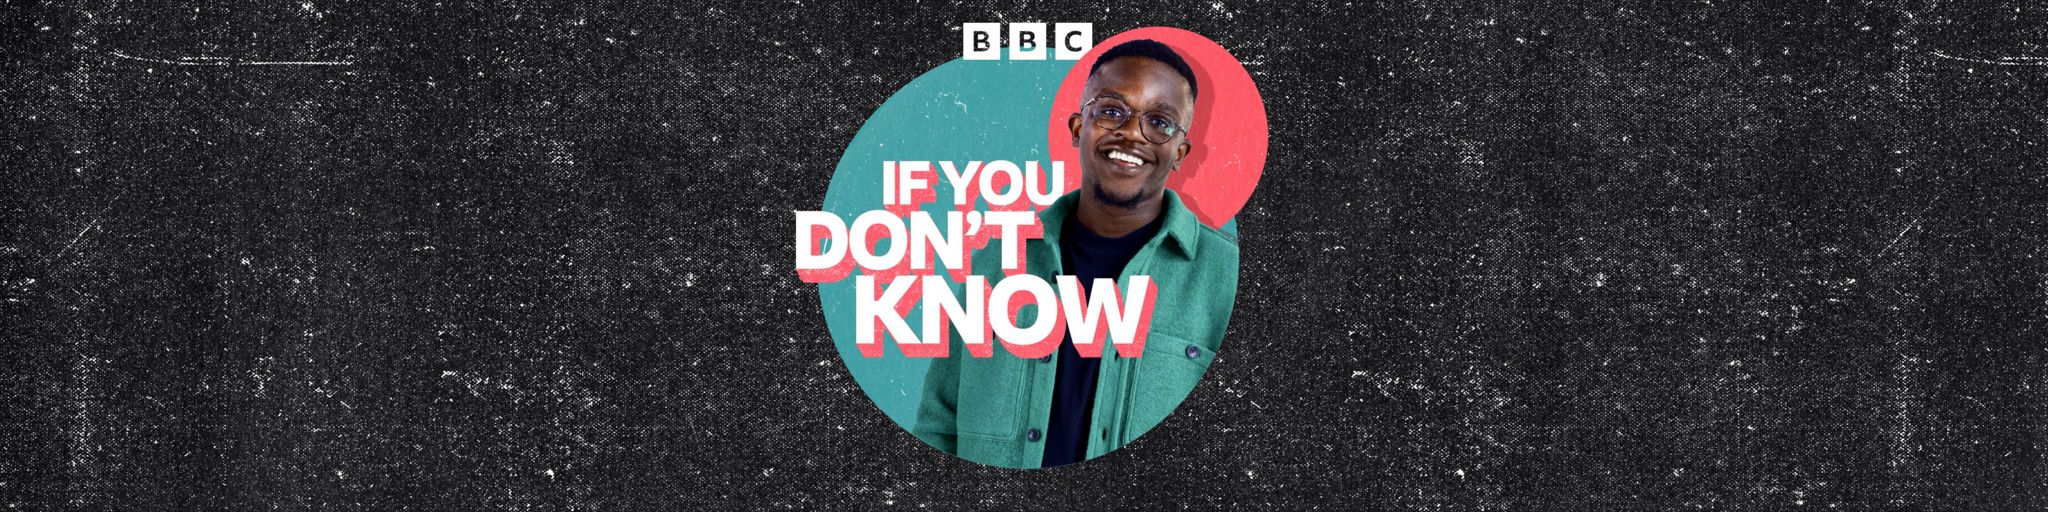 A banner with the If You Don't Know logo and presenter